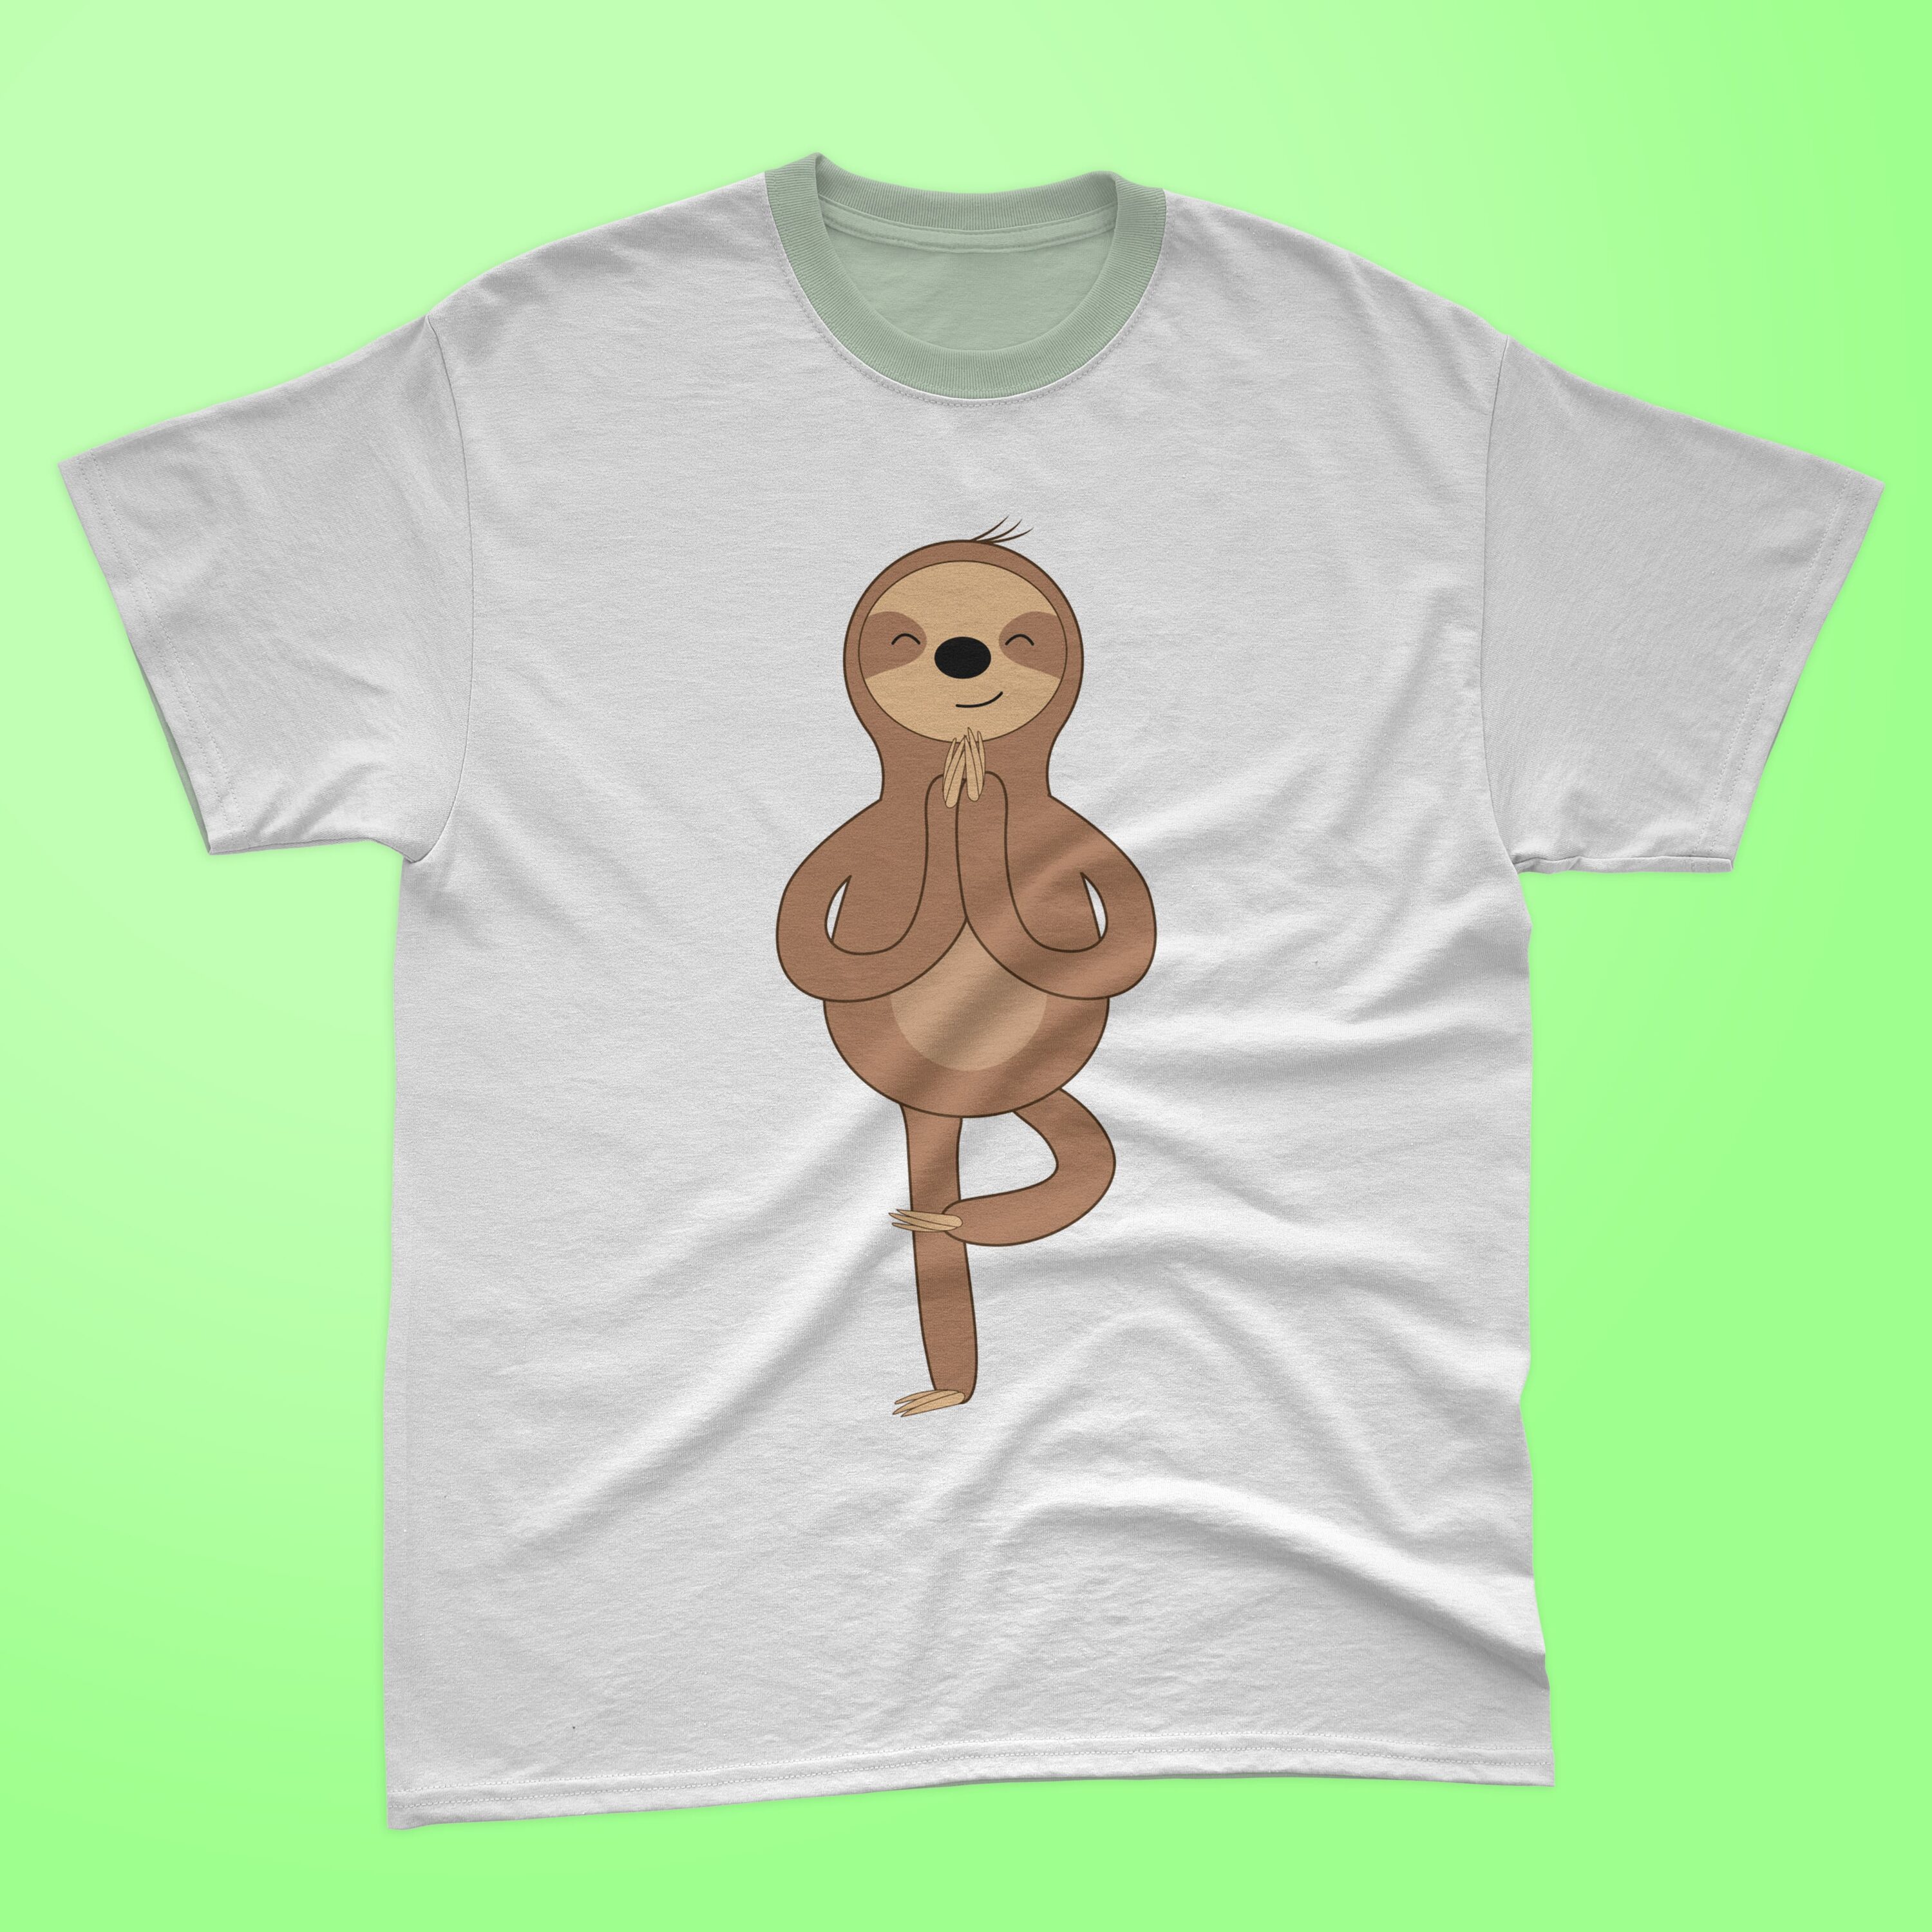 Image of white t-shirt with cute yoga sloth print.